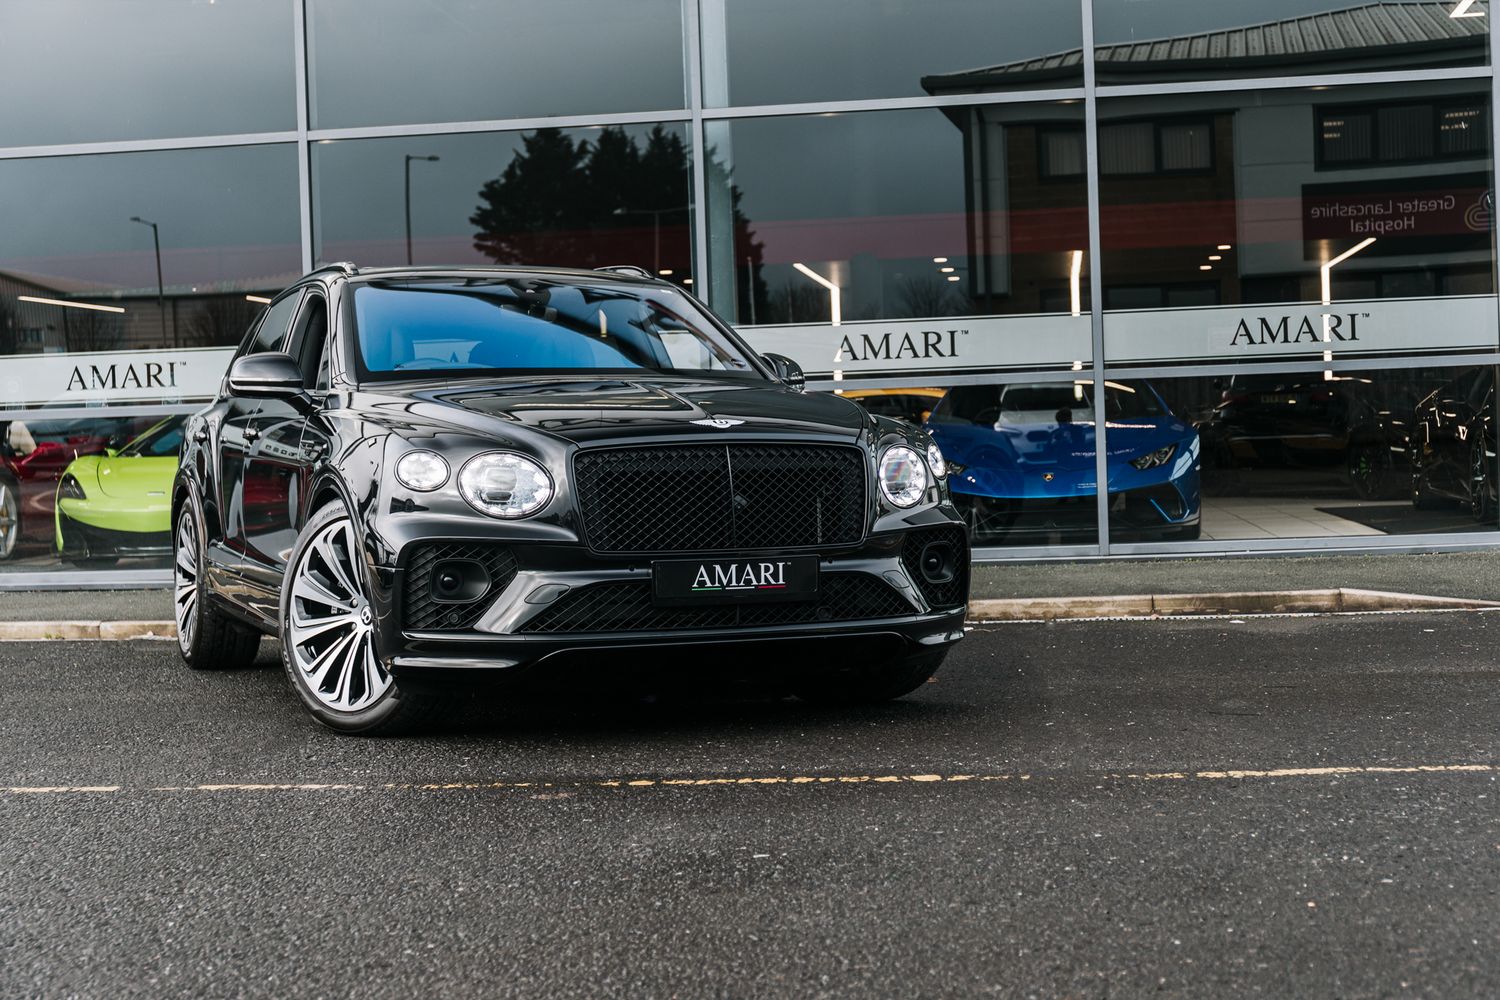 Bentley Bentayga First Edition 4.0 V8 5Dr Automatic